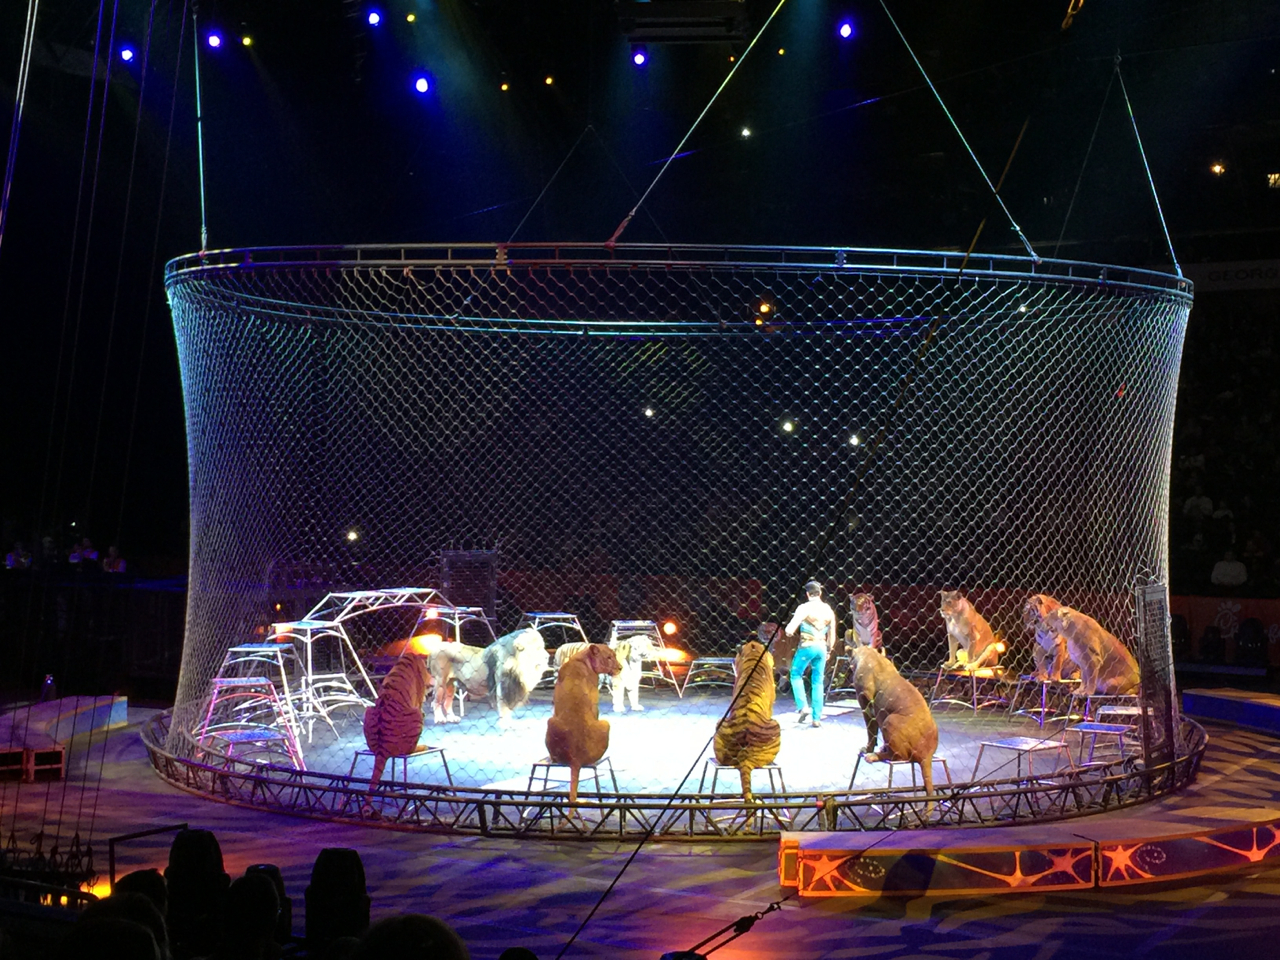 Ringling Brothers Circus Legends